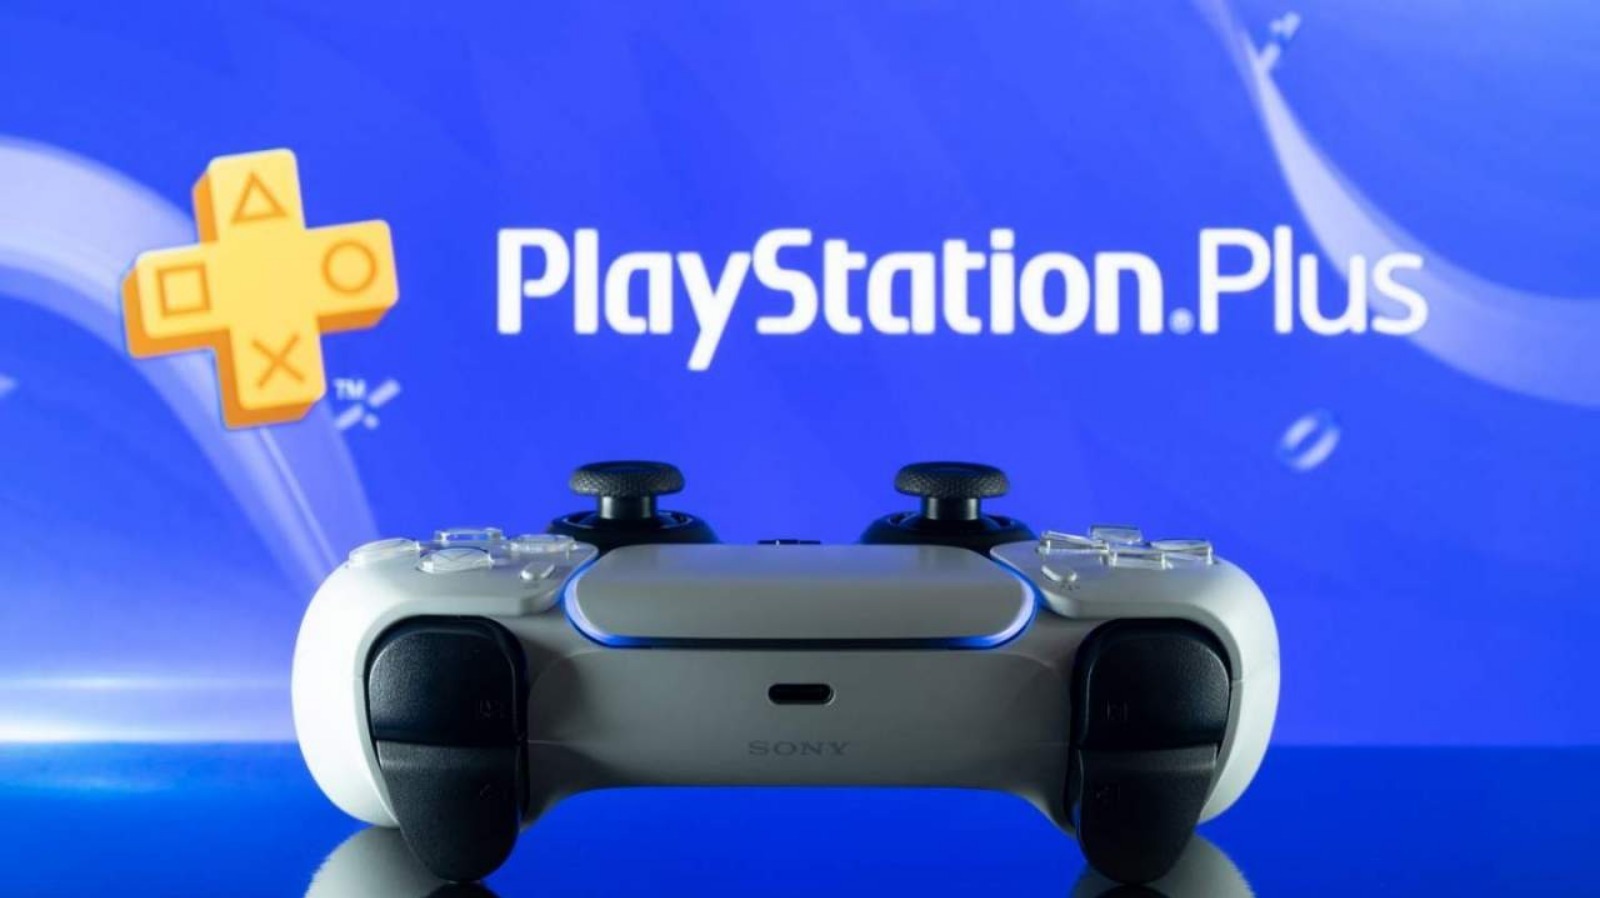 What's The Difference Between PlayStation Plus And Now?